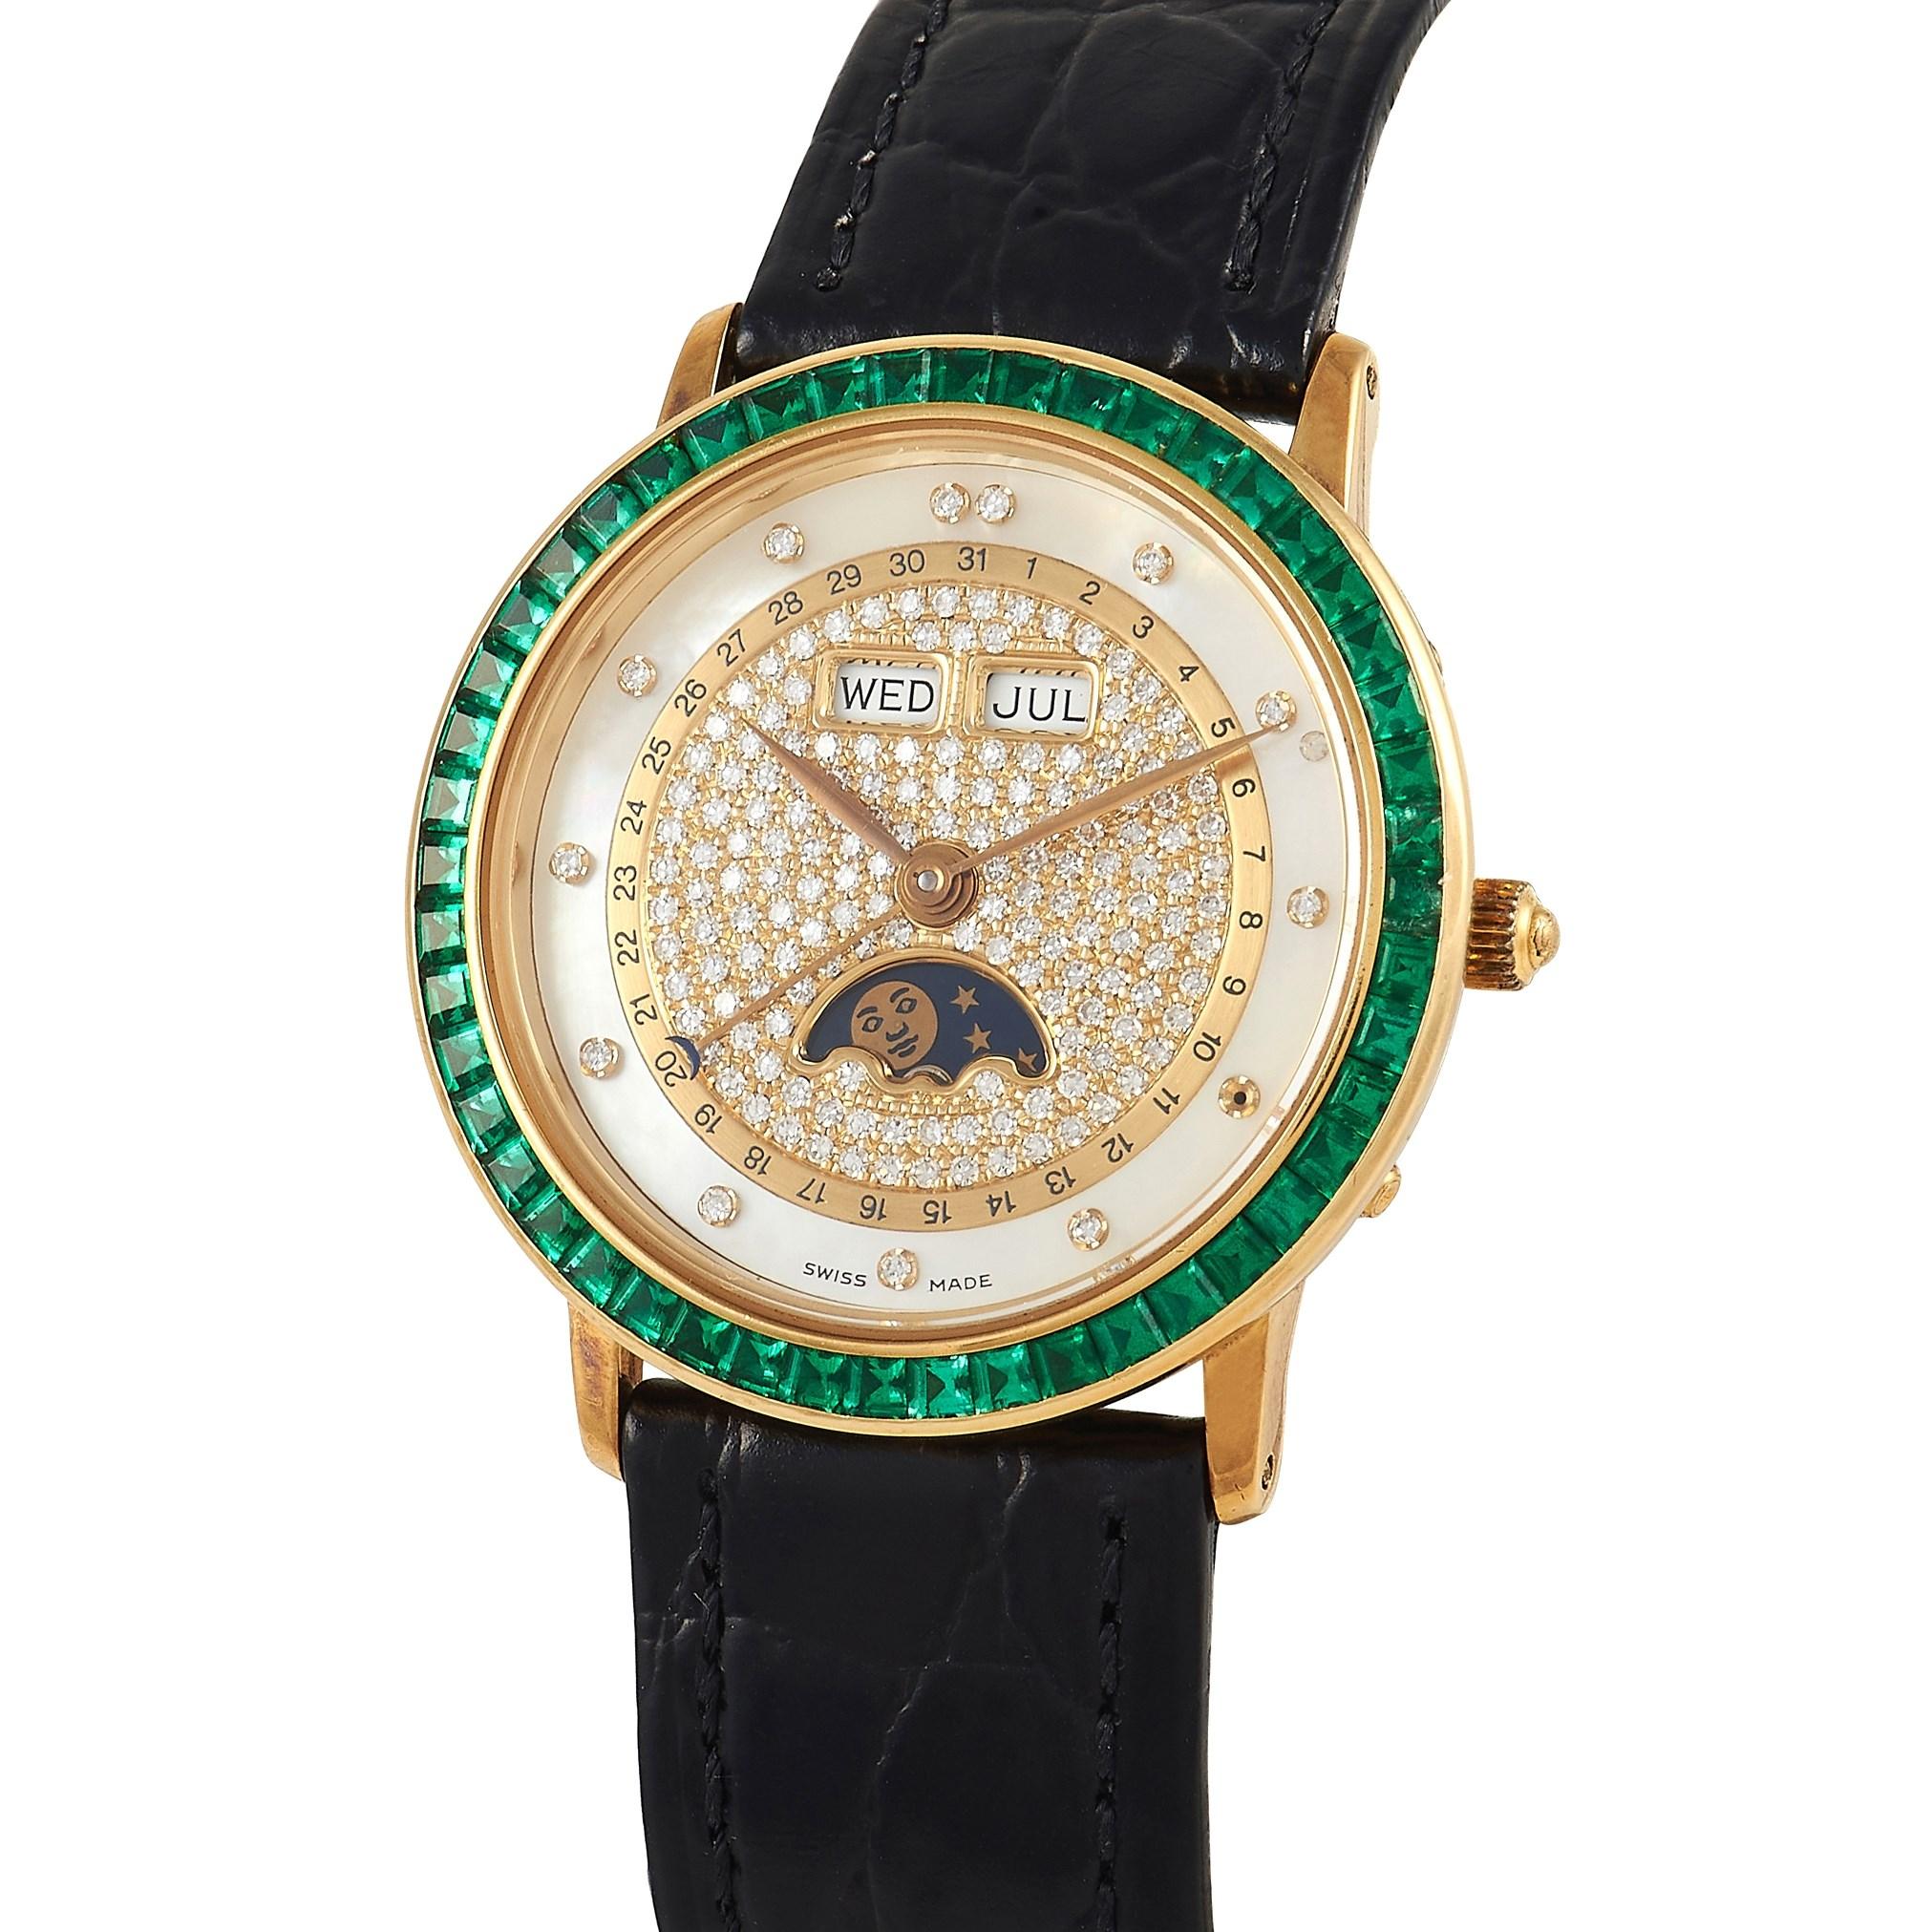 With a little bit of color and a little bit of sparkle, this Blancpain Villeret Date Moon Phase Diamond Ladies Watch will charm you with its feminine spirit. It comes with a yellow gold case paired with a bezel set with green gemstones. The dial is